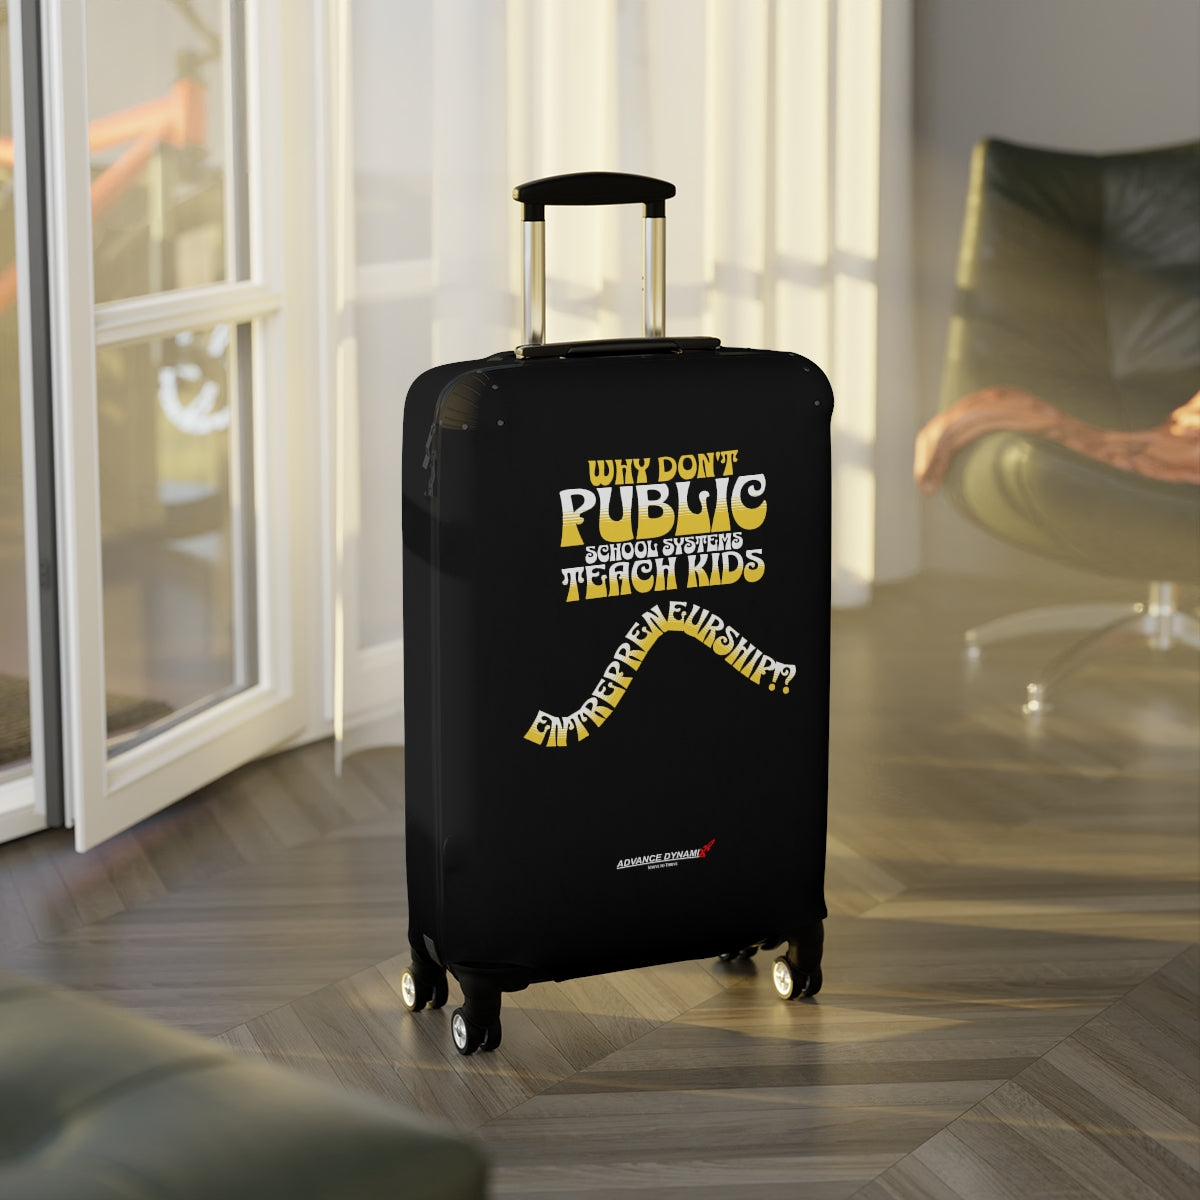 Why Don't Public School Systems Teach Kids Entrepreneurship? - Luggage Covers Infused with Advance Dynamix Add-A-Tude - Tell the world!